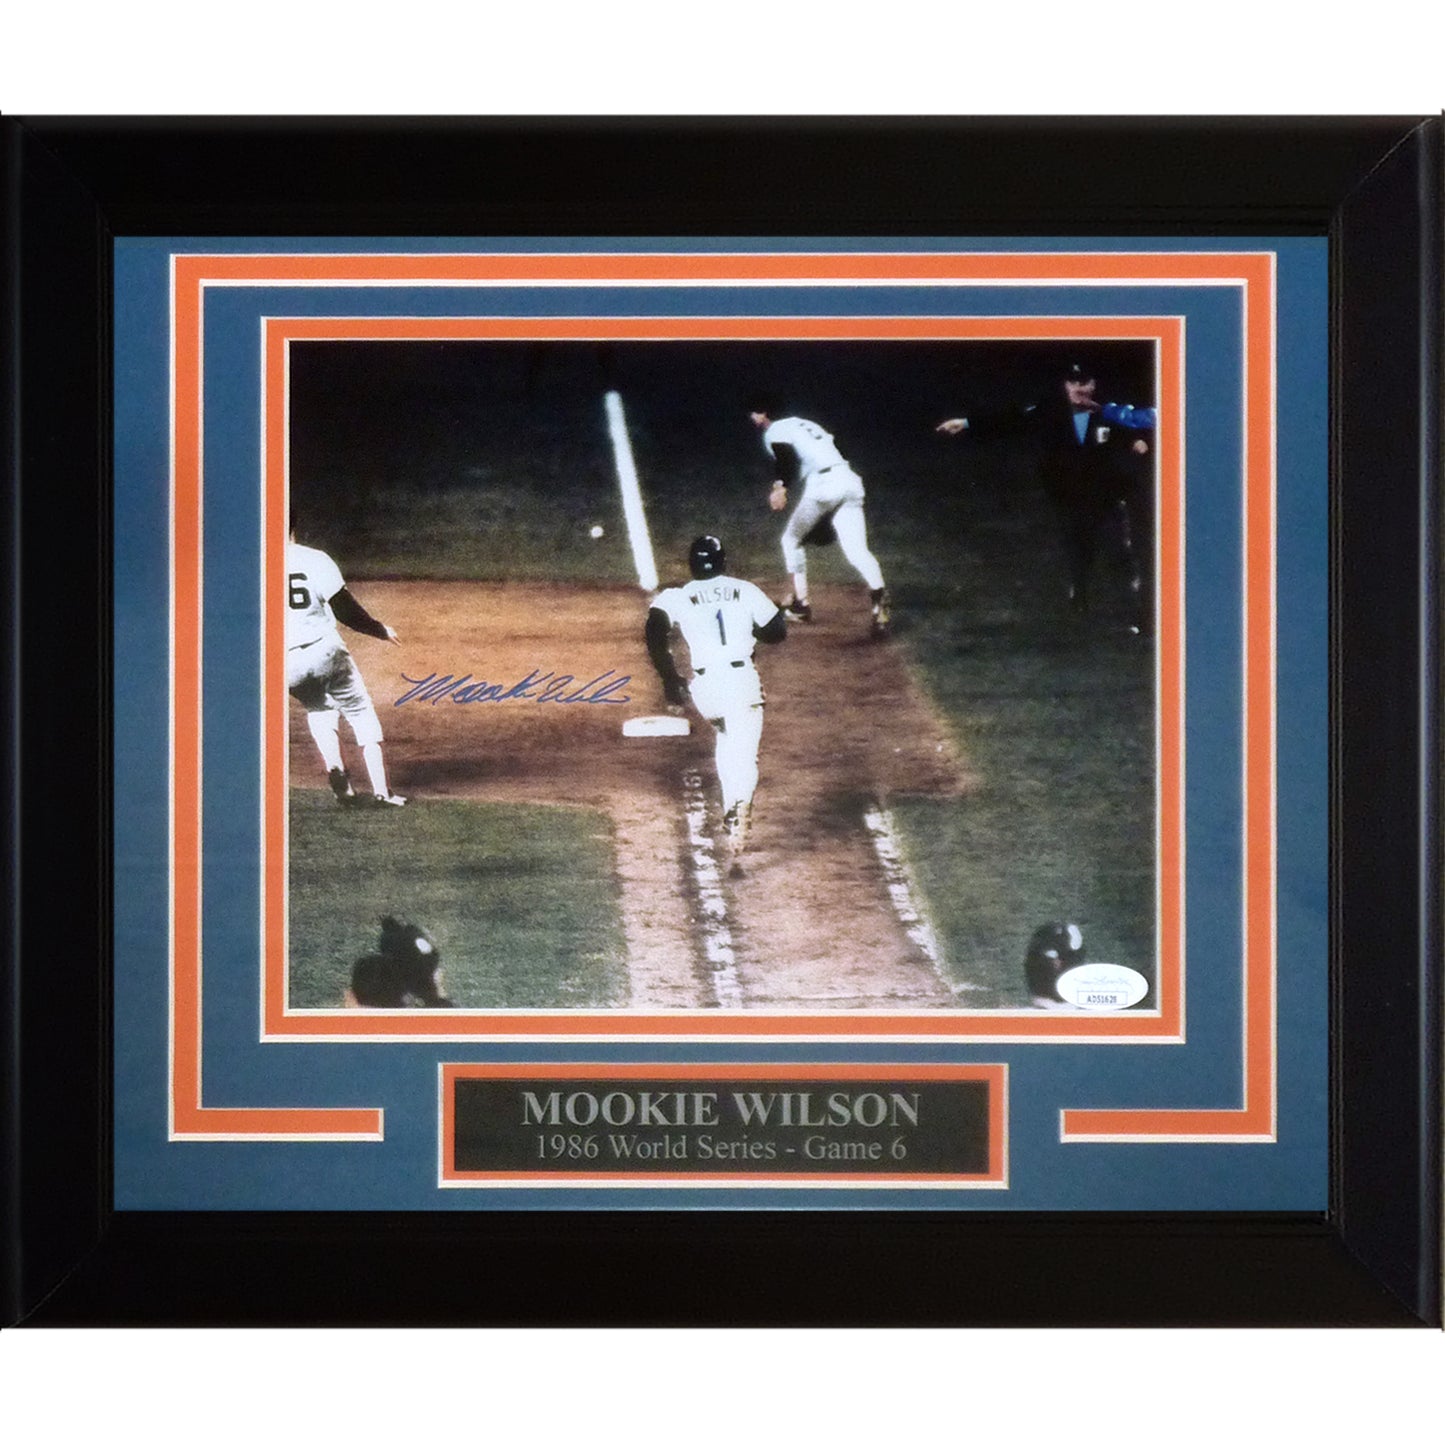 Mookie Wilson Autographed New York Mets (1986 World Series) Deluxe Framed 8x10 Photo - JSA